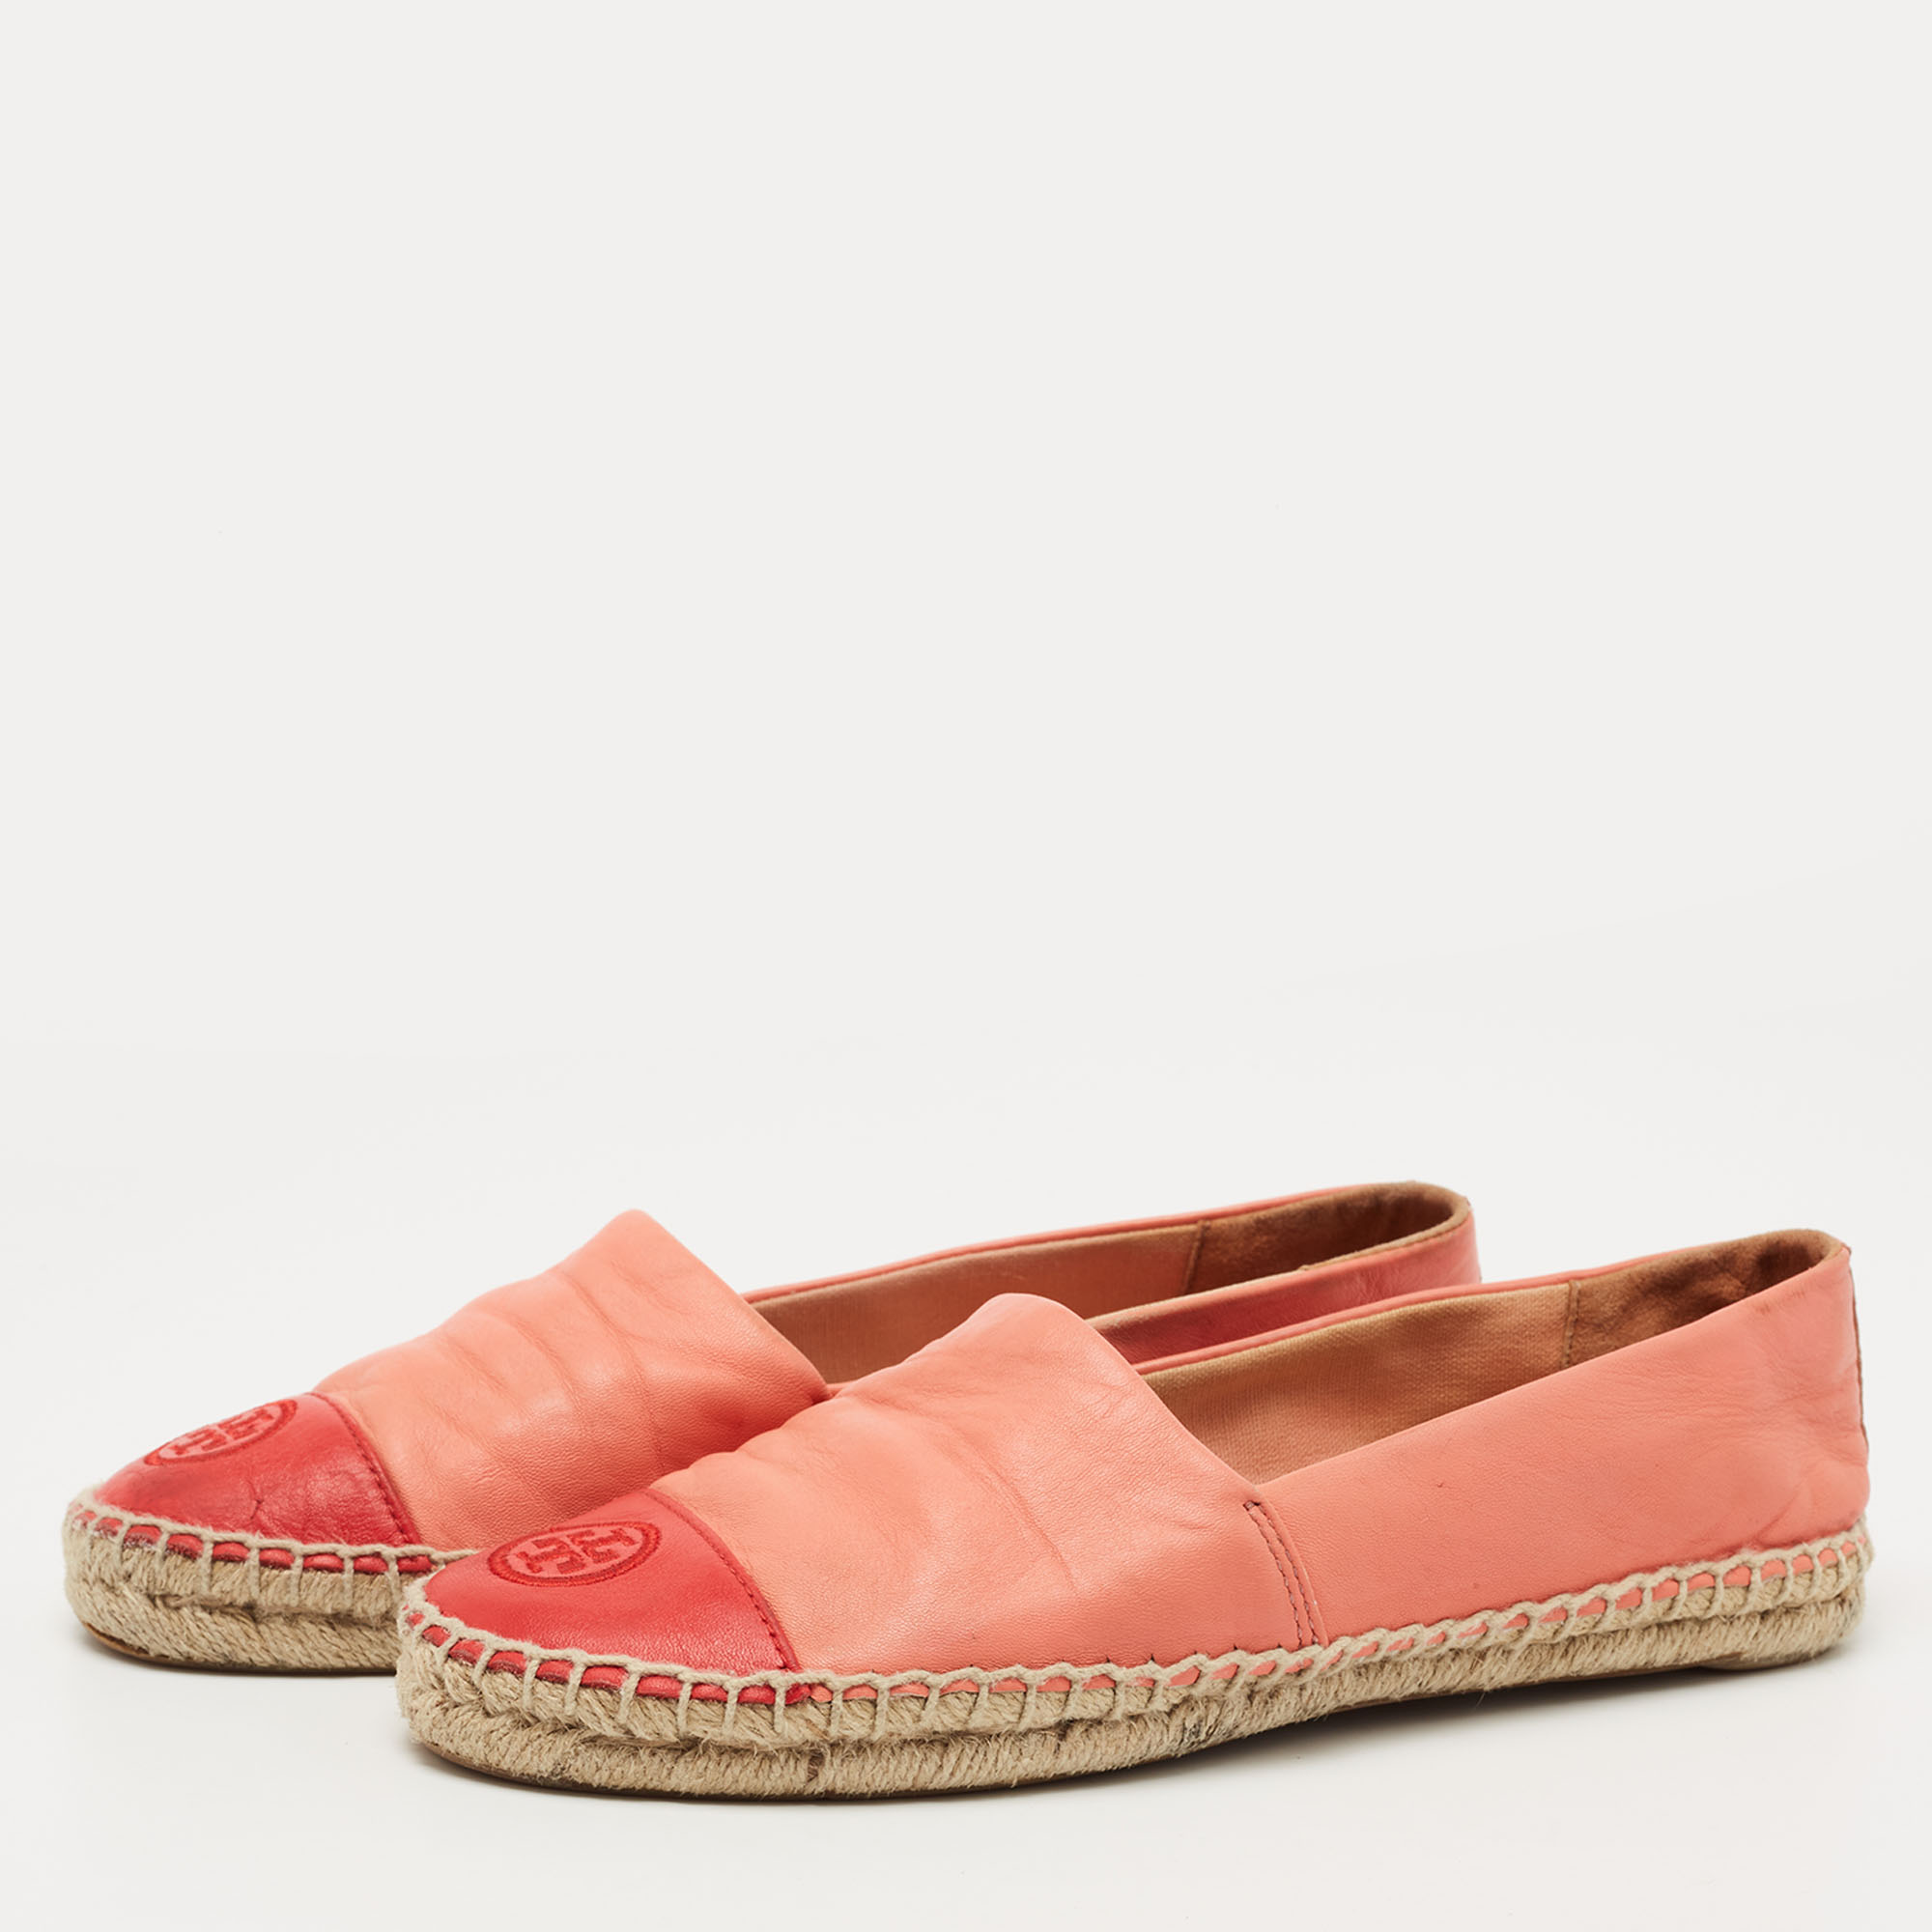 

Tory Burch Pink/Red Leather Flat Espadrilles Size